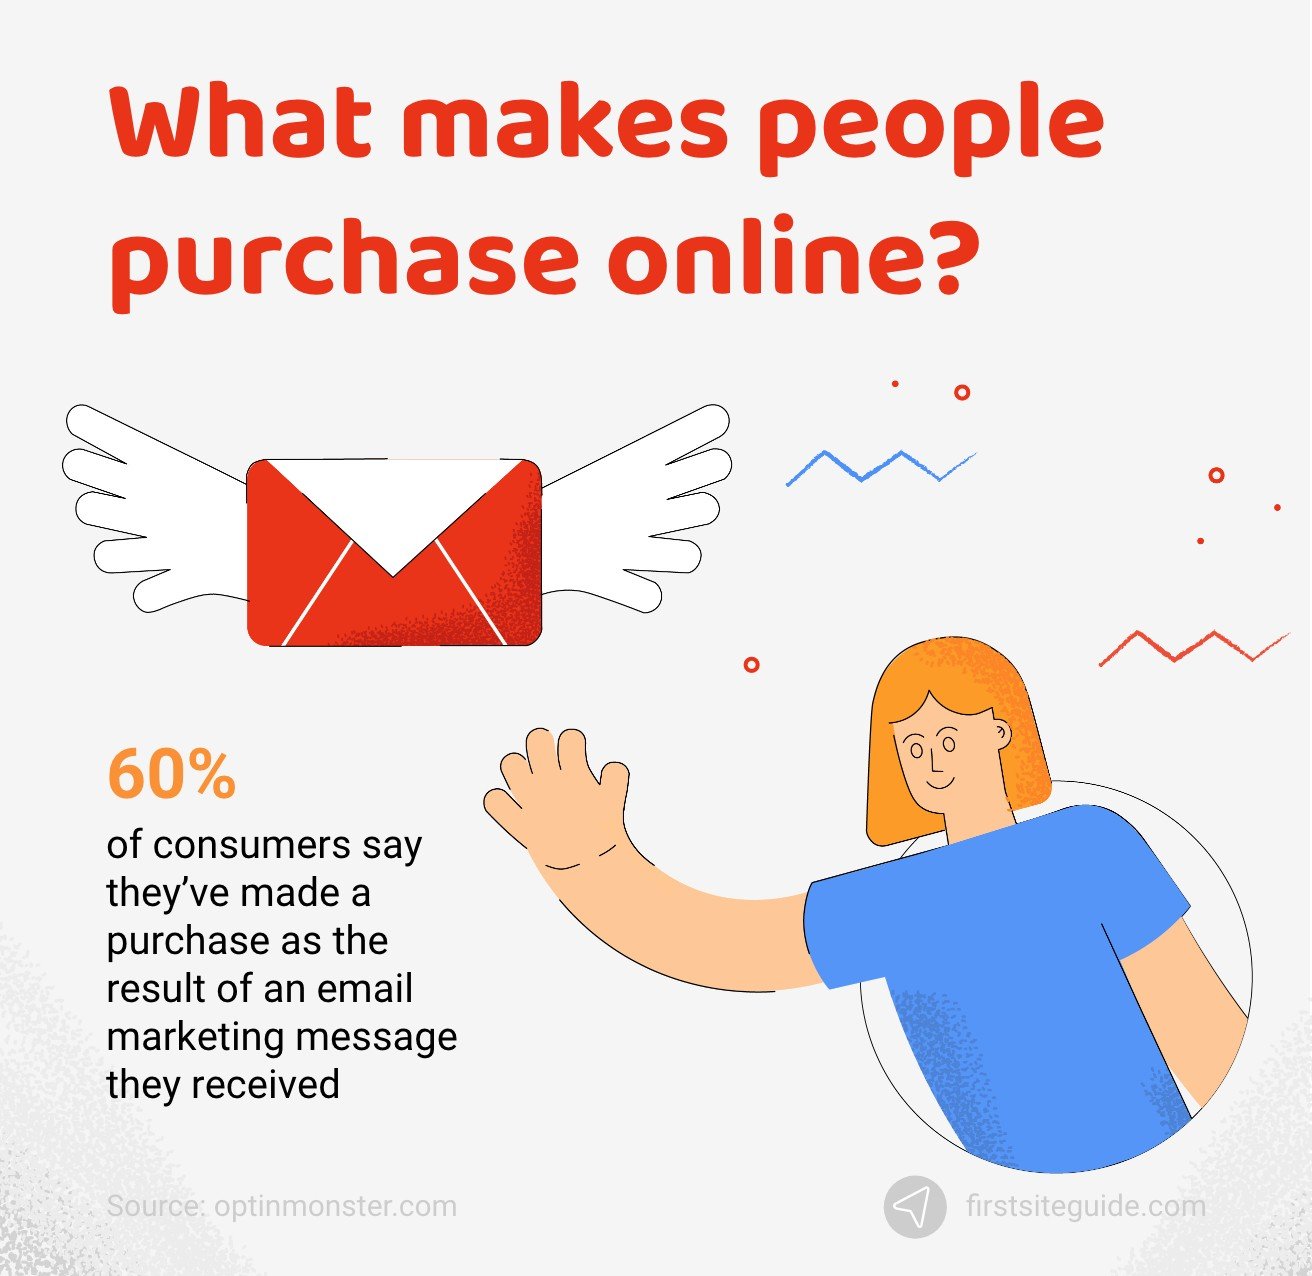 What makes people purchase online